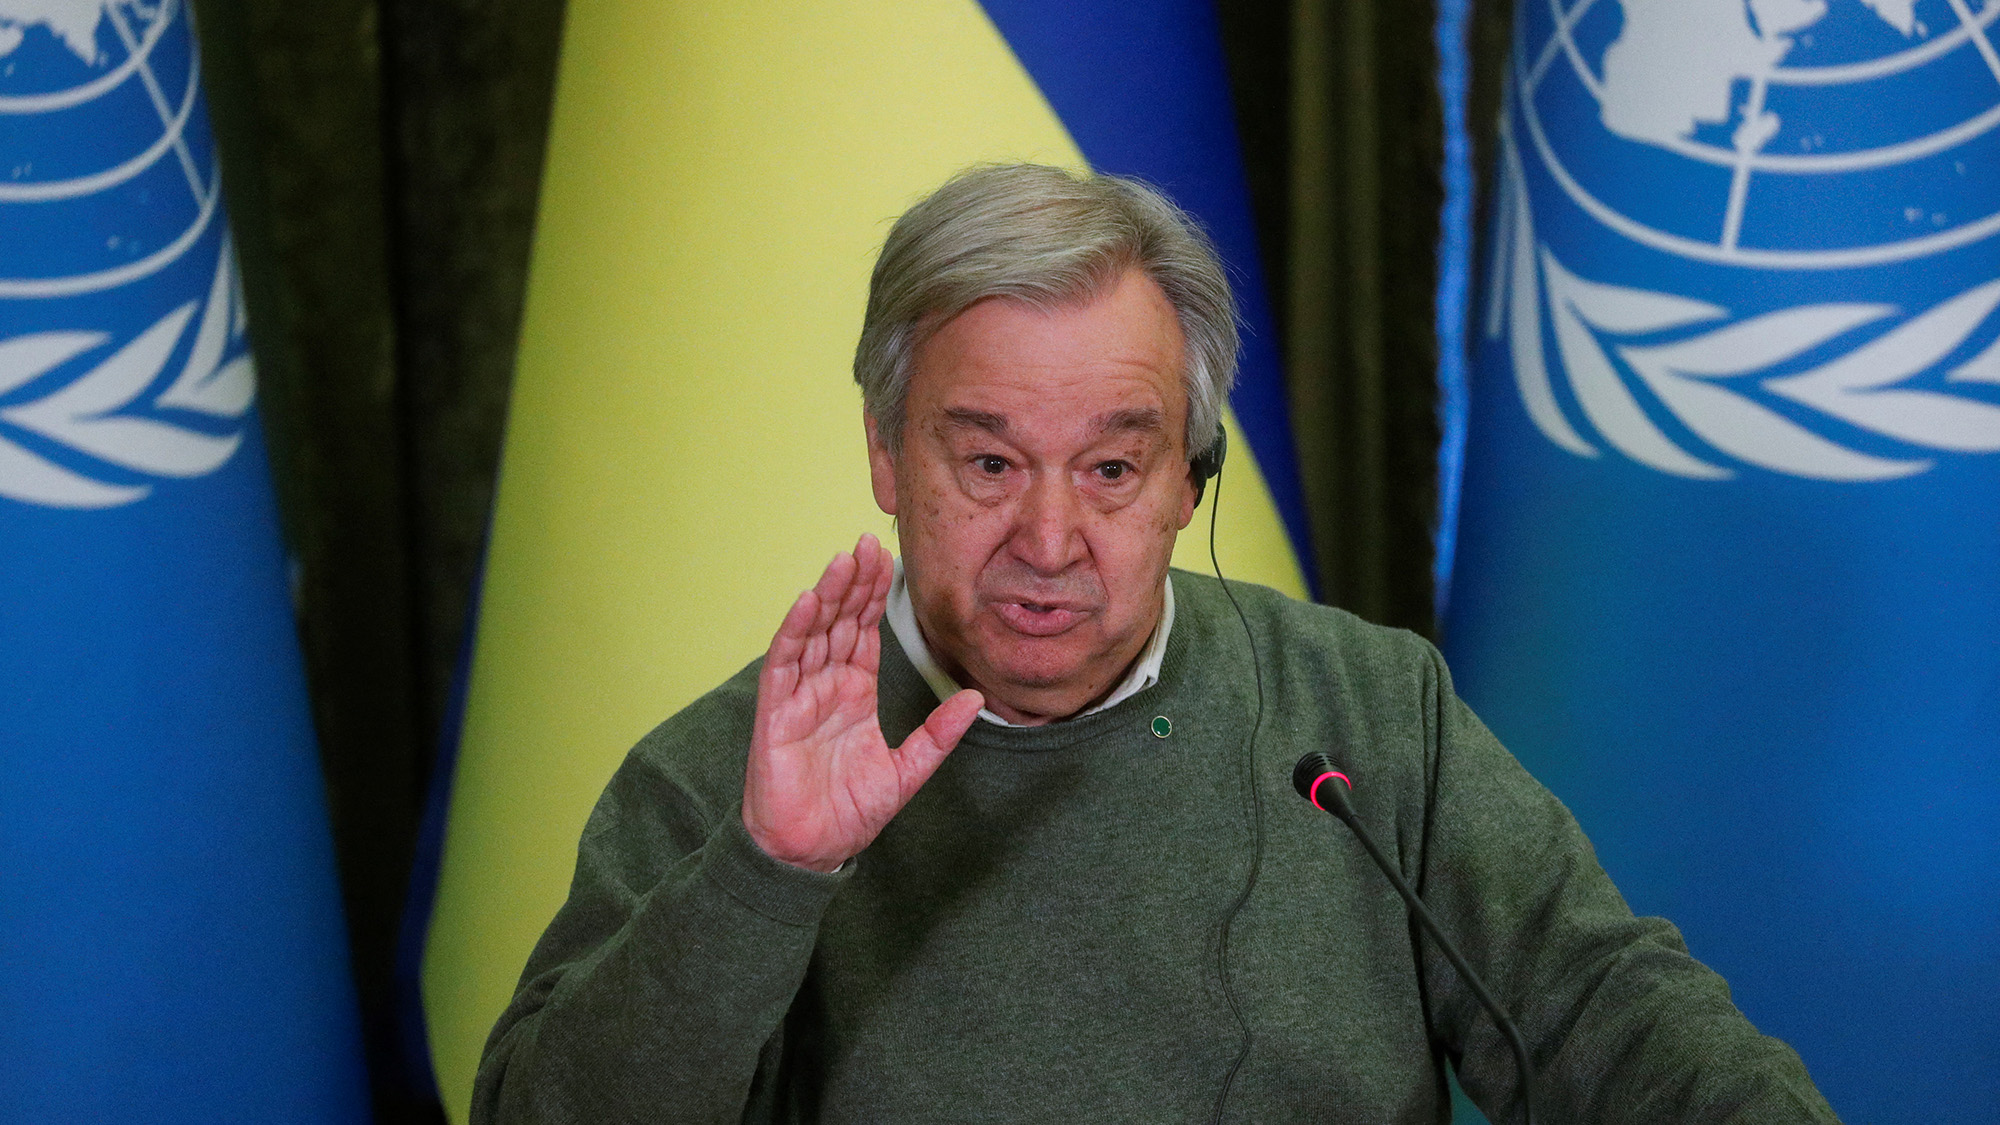 UN chief urges evacuation corridors to open in Mariupol: “Thousands of civilians need life-saving assistance”